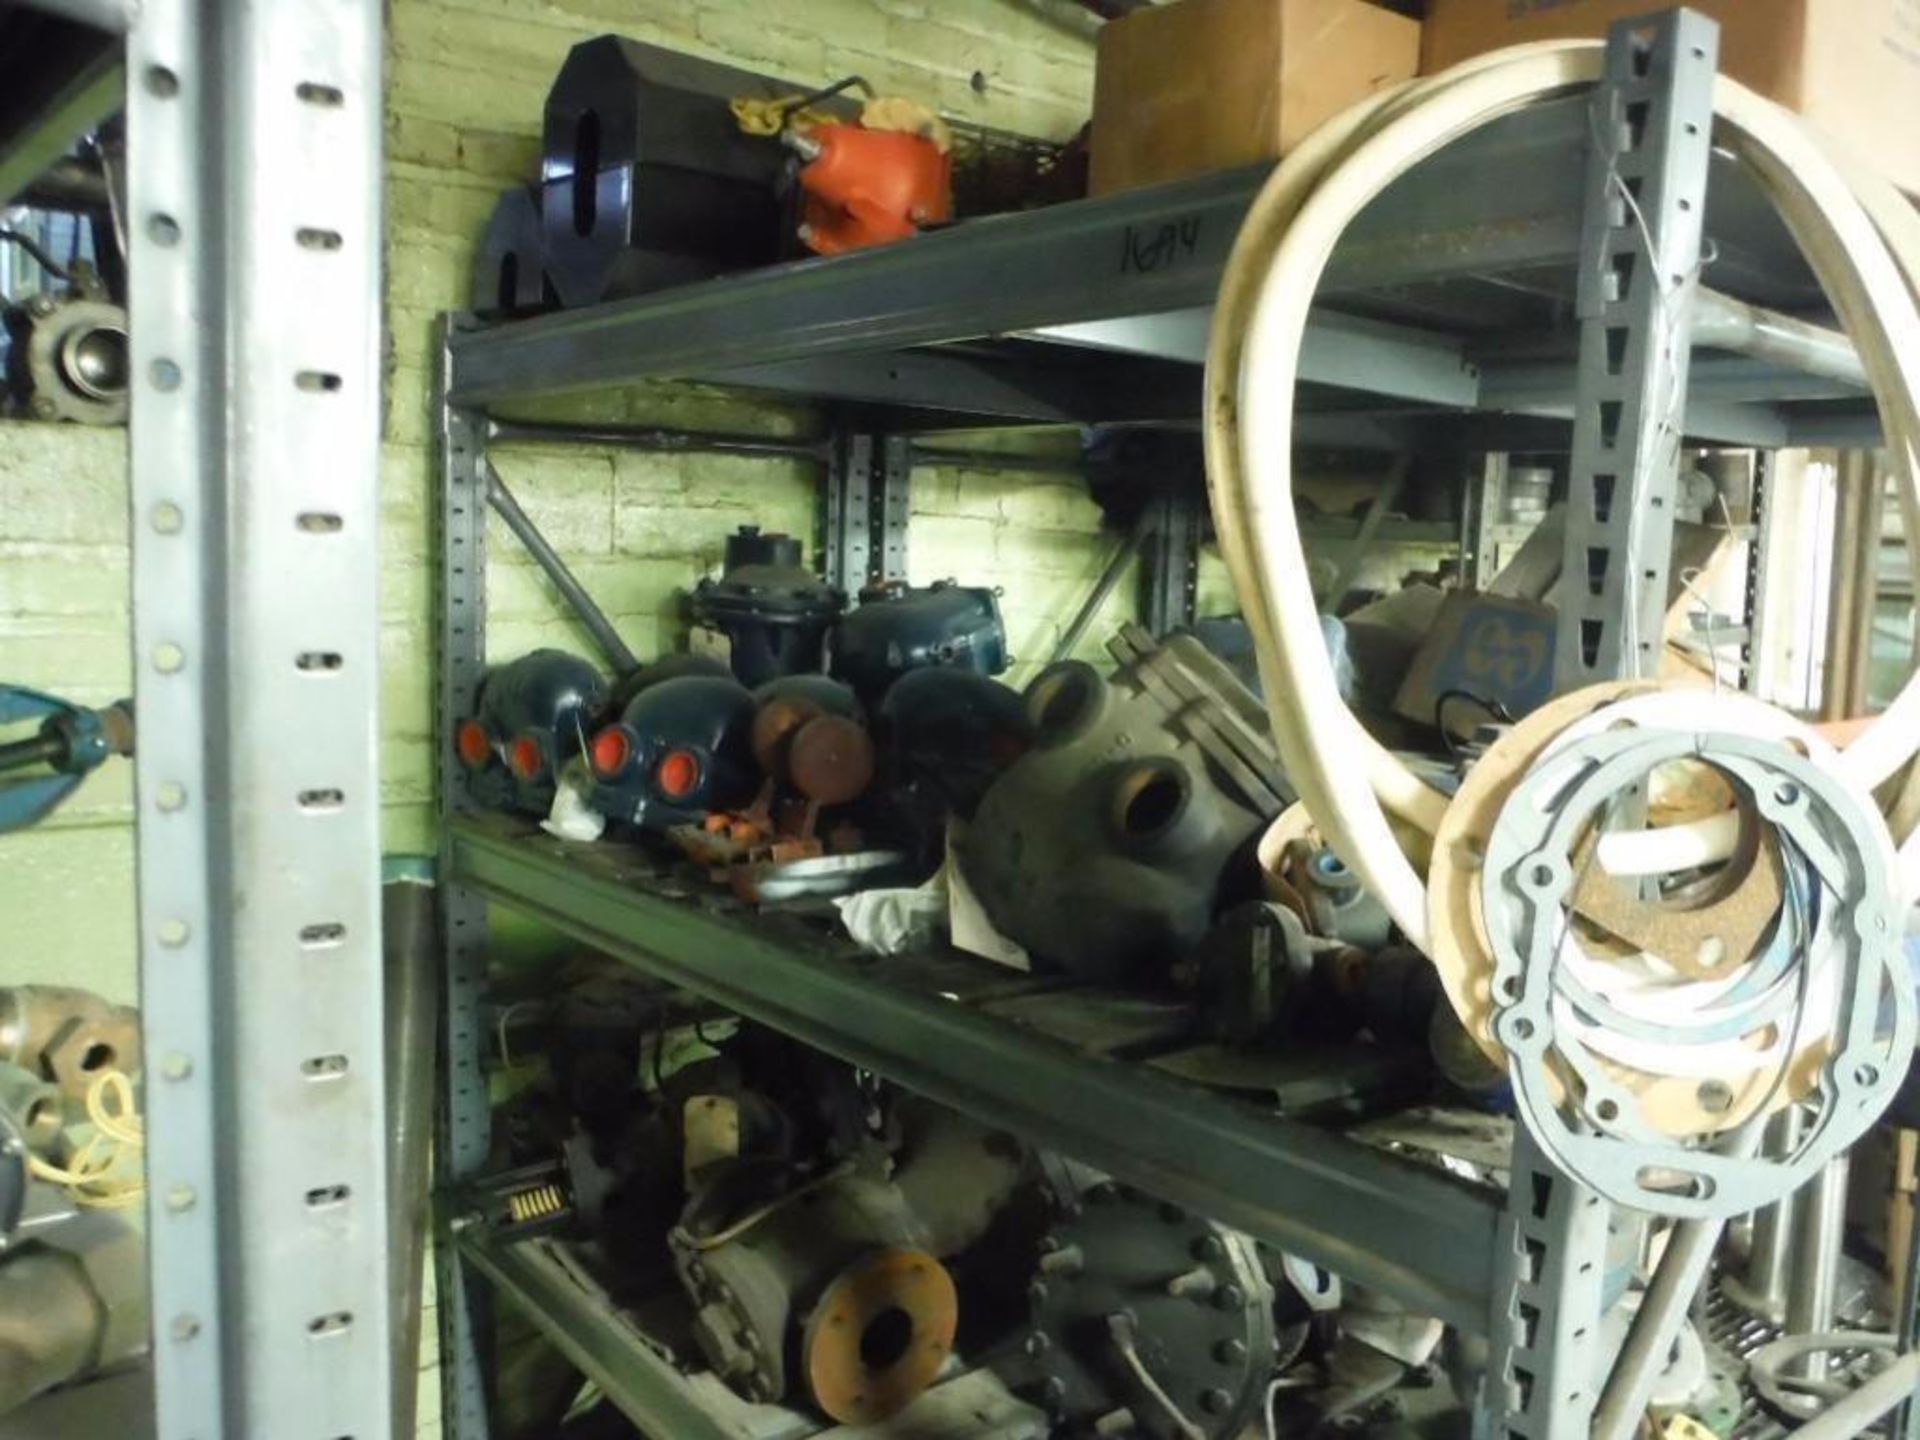 10 Shelves & content: Miscellaneous valves, fittings, brushes, and parts  Rigging Fee: $1000 - Image 8 of 14